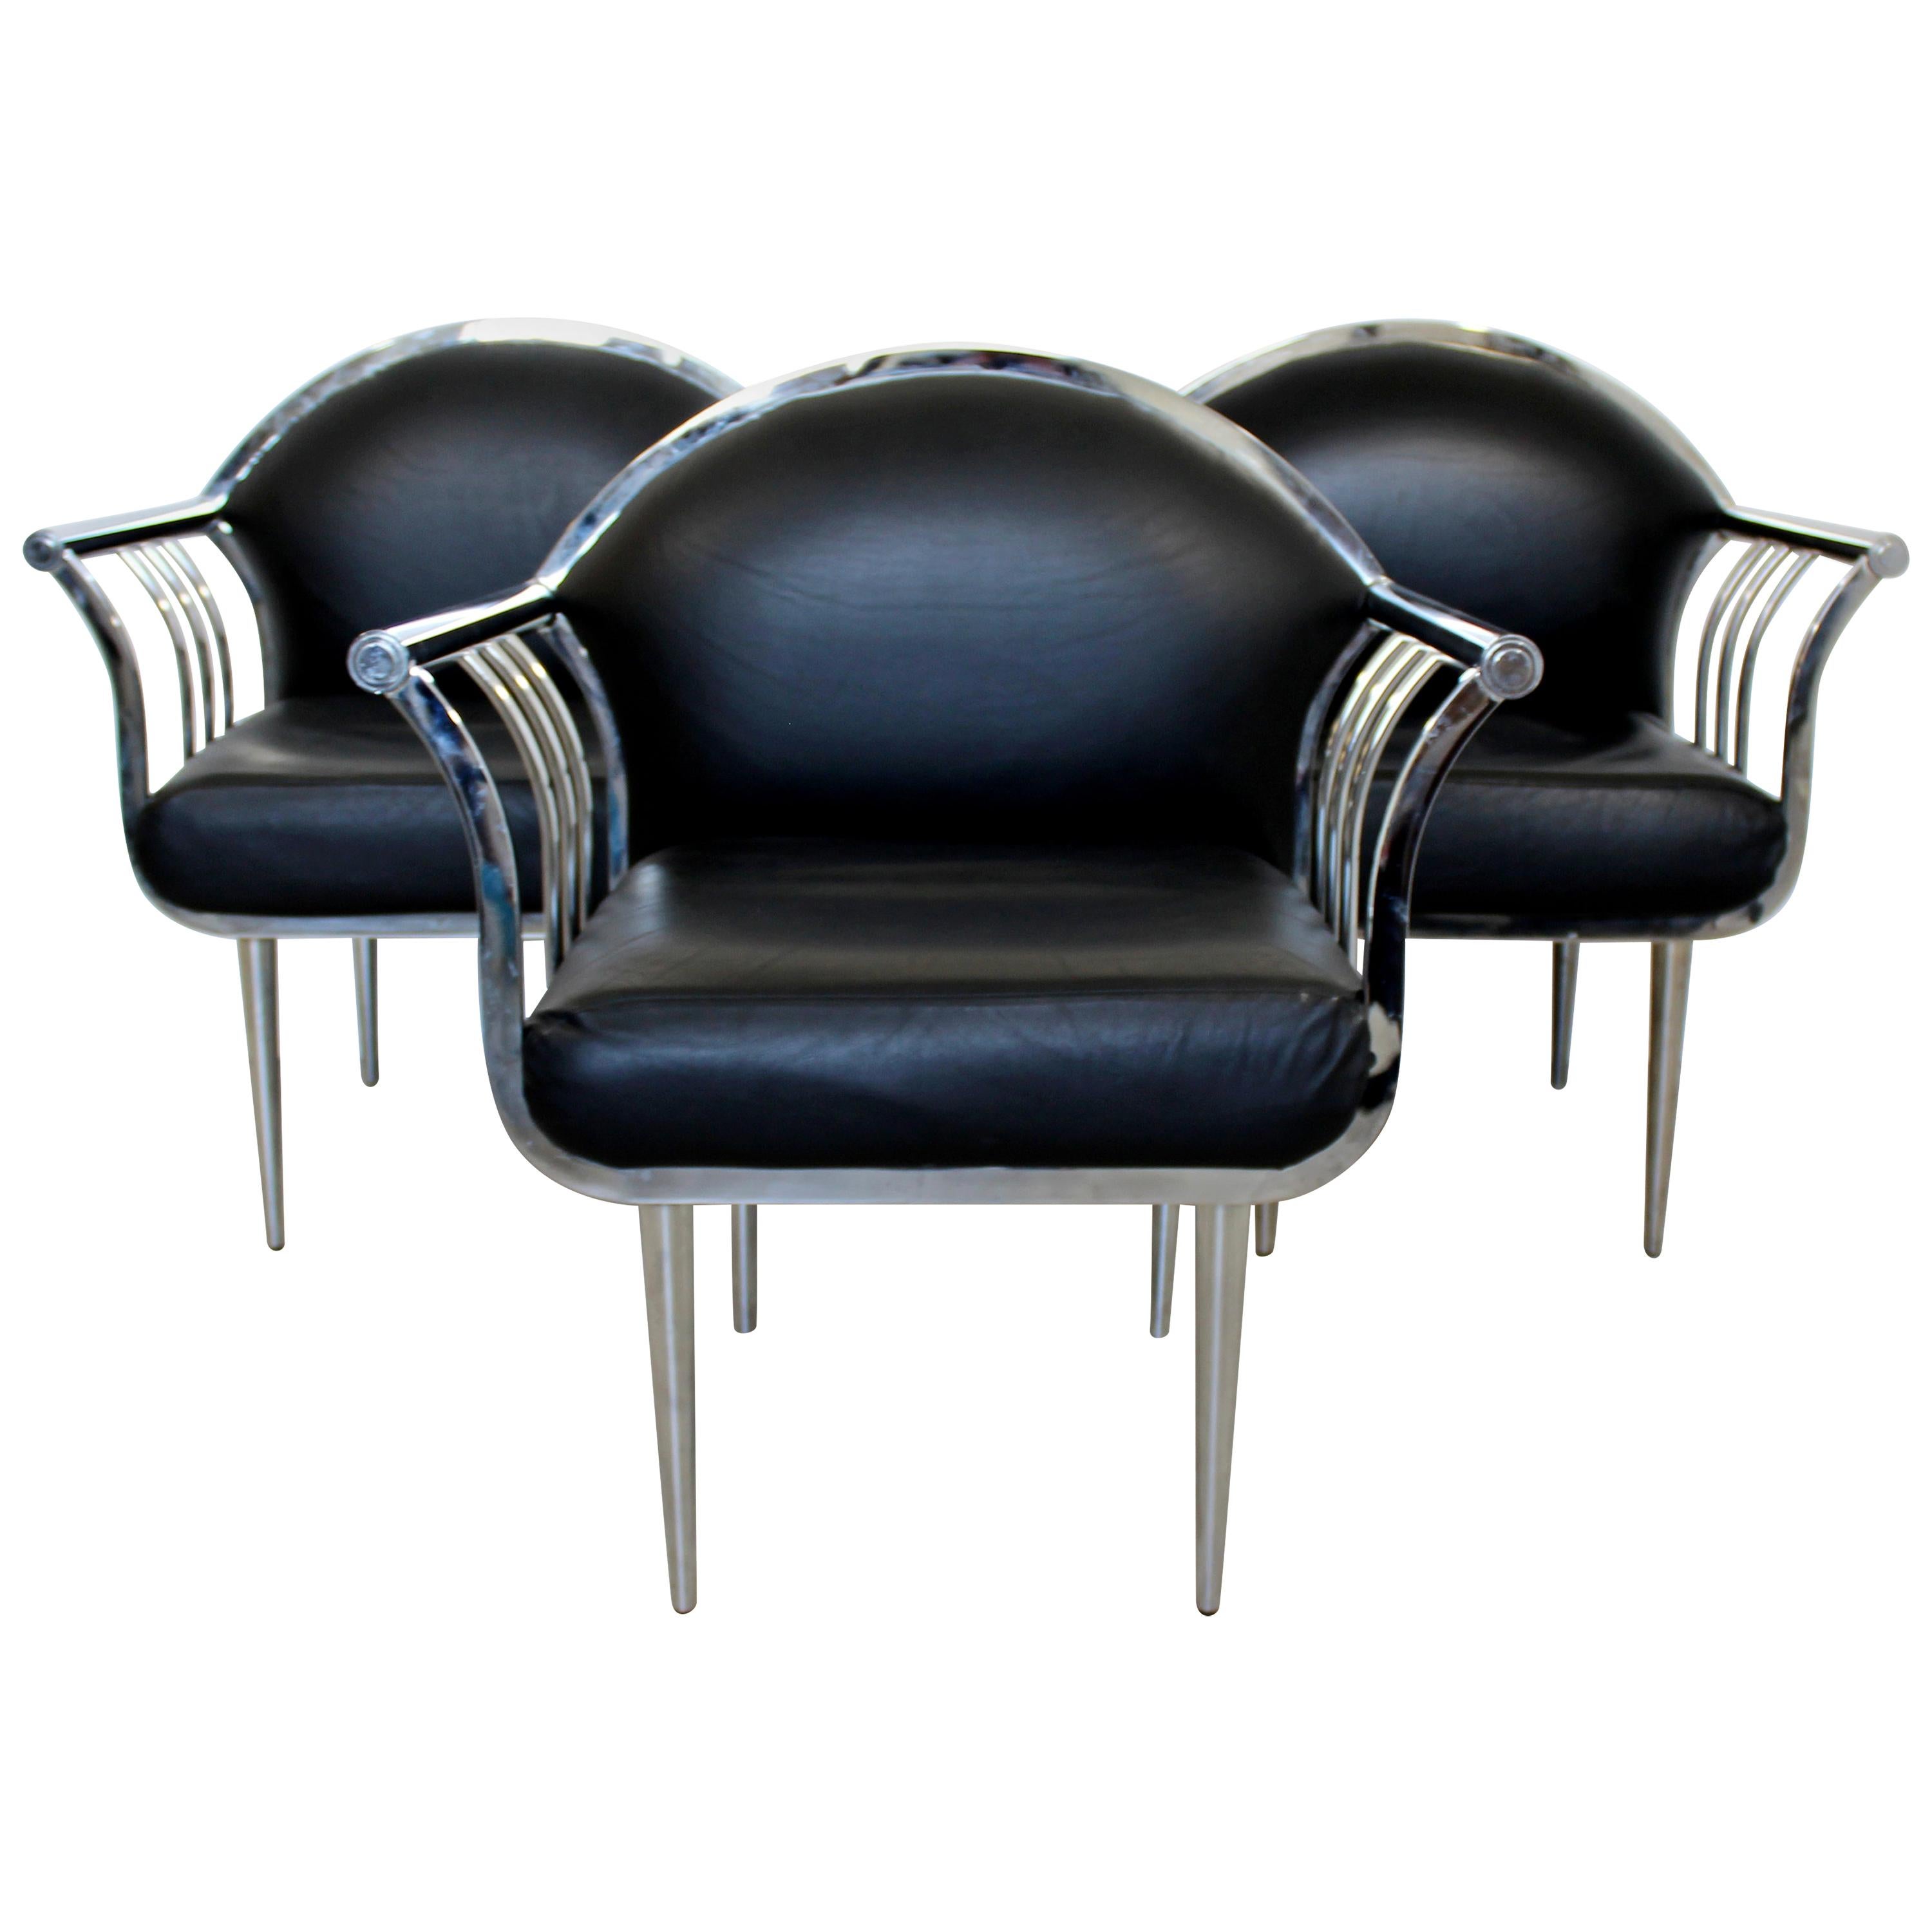 Mid-Century Modern Set of 3 Curved Chrome and Vinyl Accent Lounge Chairs, 1960s